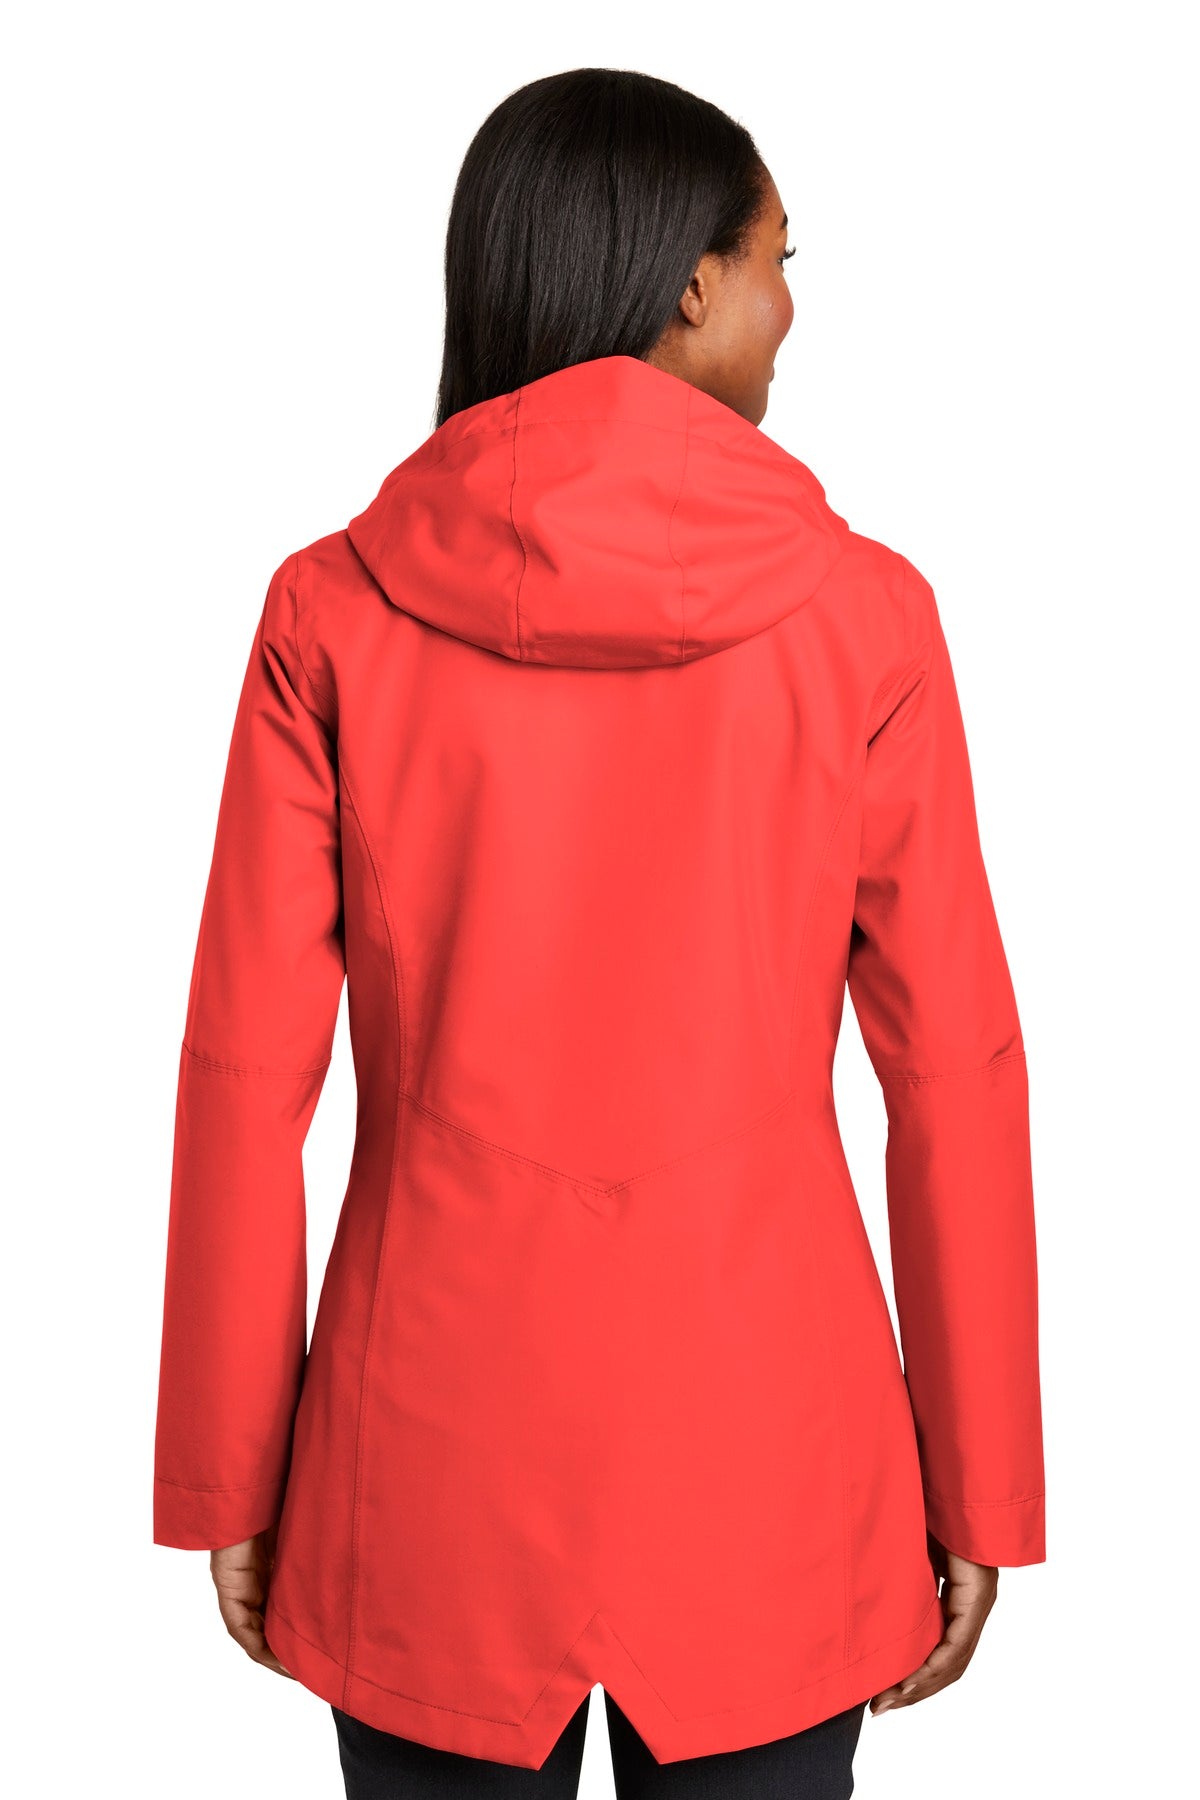 Port Authority Ladies Collective Outer Shell Jacket. L900